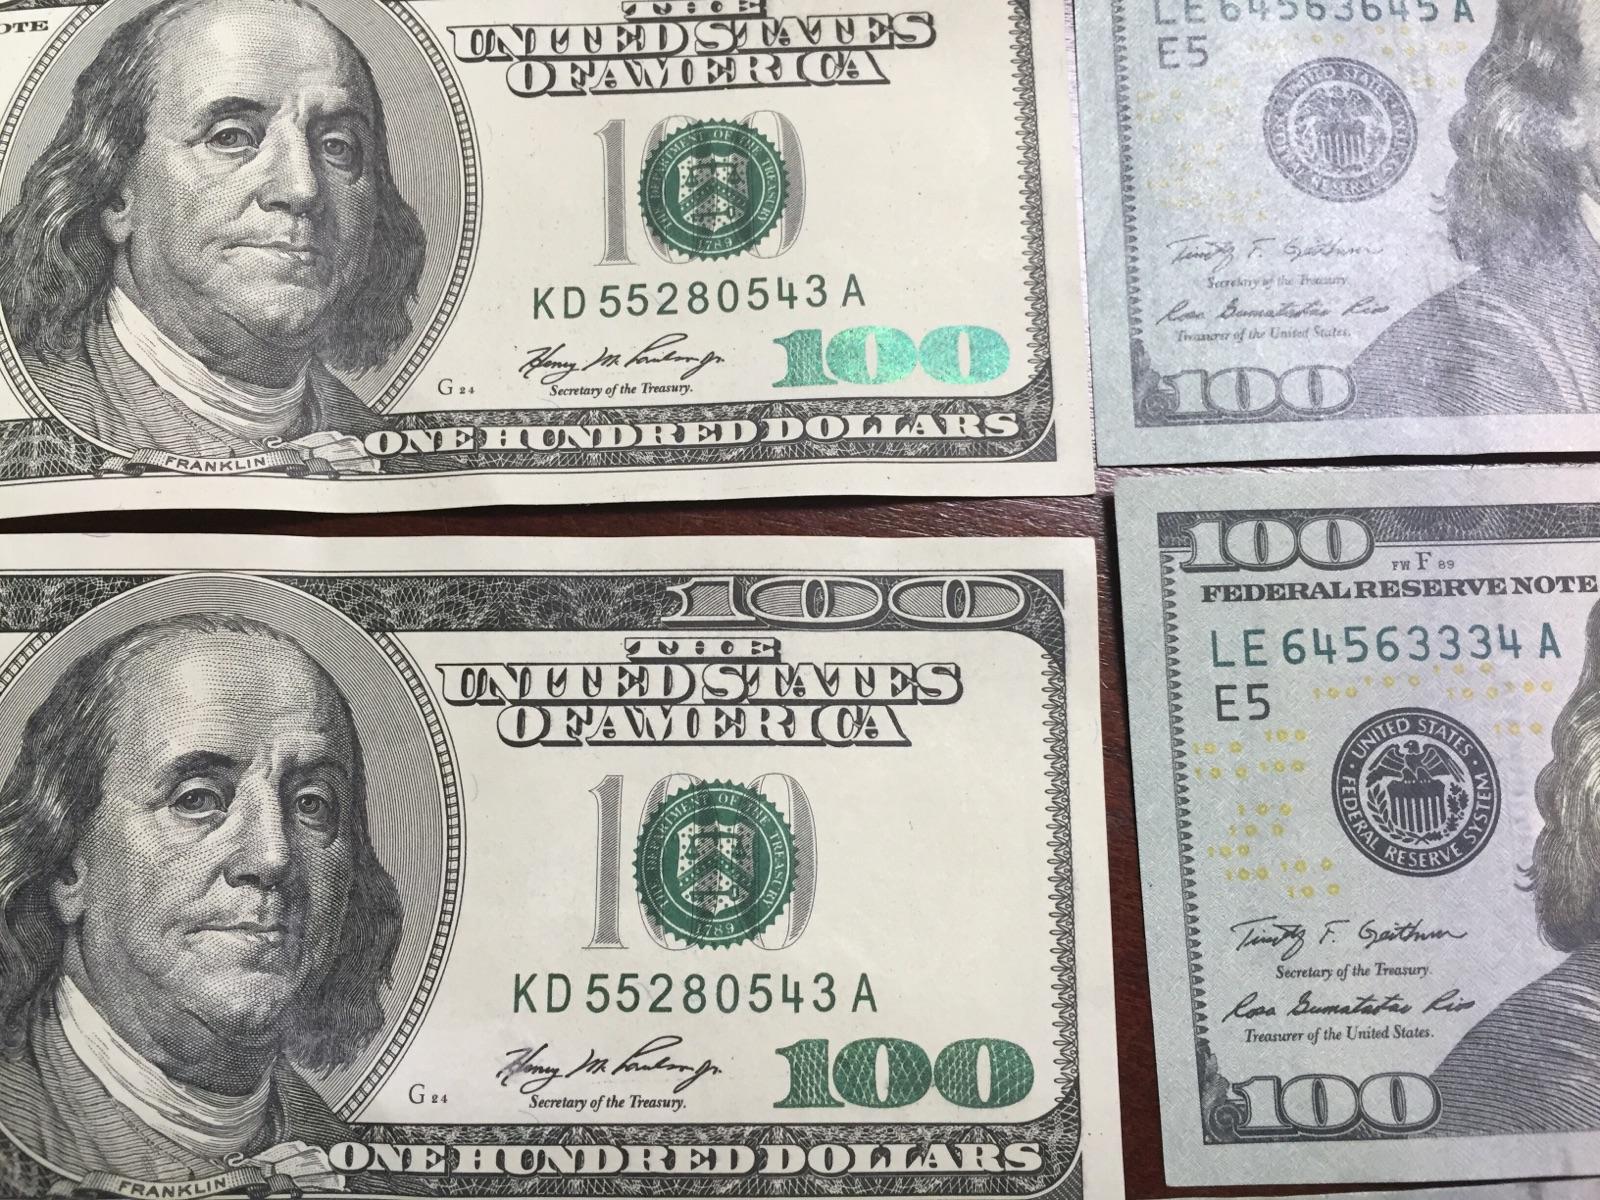 Counterfeit $100 bills confiscated by Monroe Co. Sheriff's Office.  (Source: Monroe Co. Sheriff's Office) 